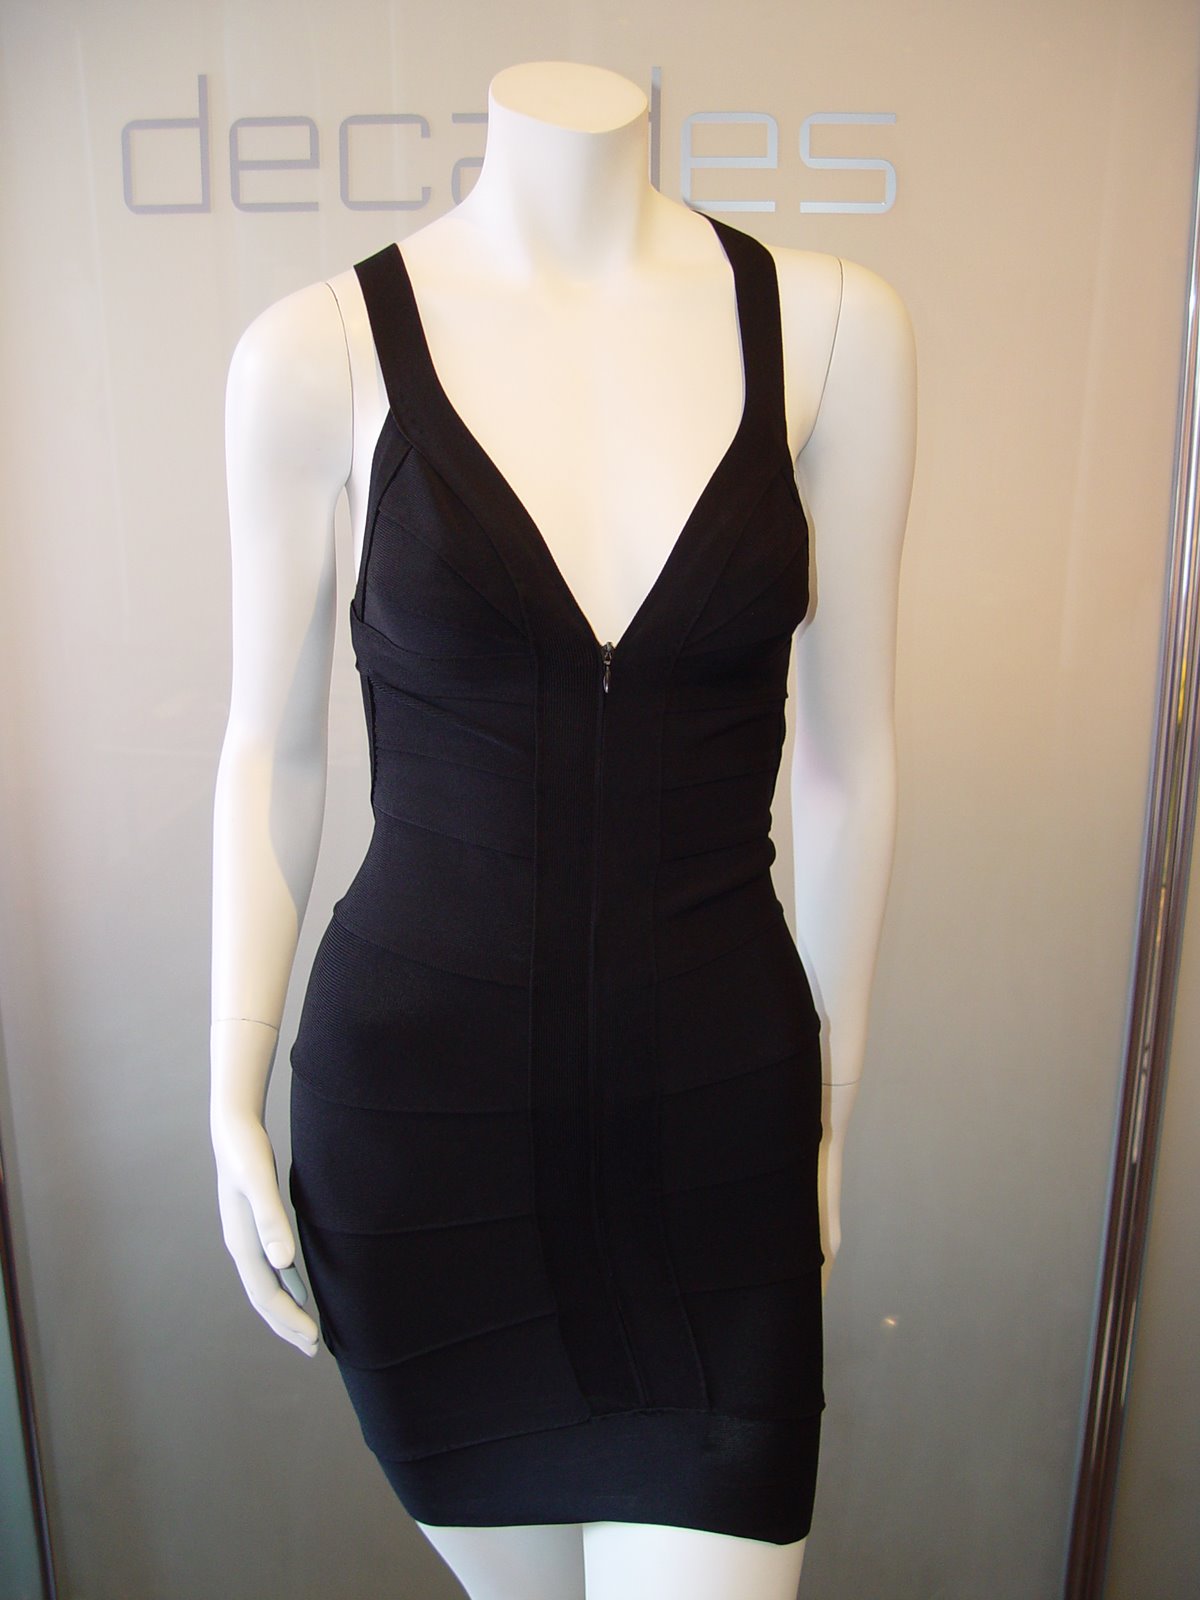 [HERVE+LEGER+BLACK+BANDAGE+DRESS+WITH+SEXY+CRISS+CROSS+BACK+MARKED+SIZE+SMALL+TIGHT+ON+SIZE+FOUR+MANNEQUIN.JPG.JPG]